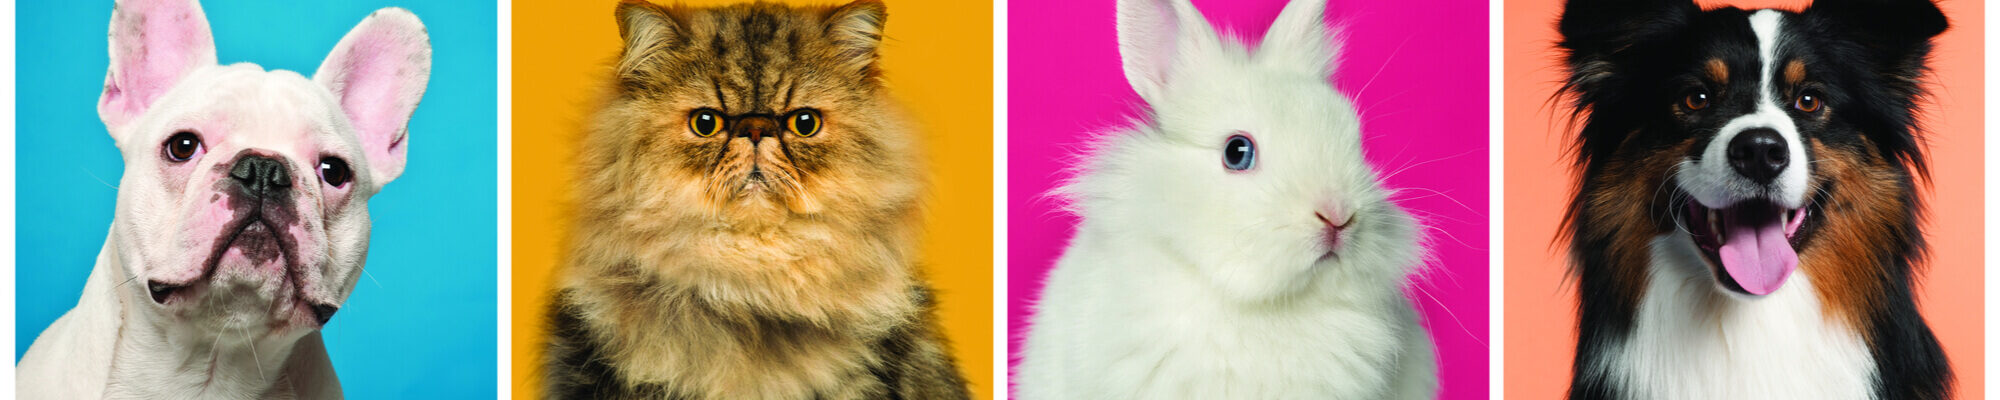 A series of photos of dogs and cats on a colorful background.